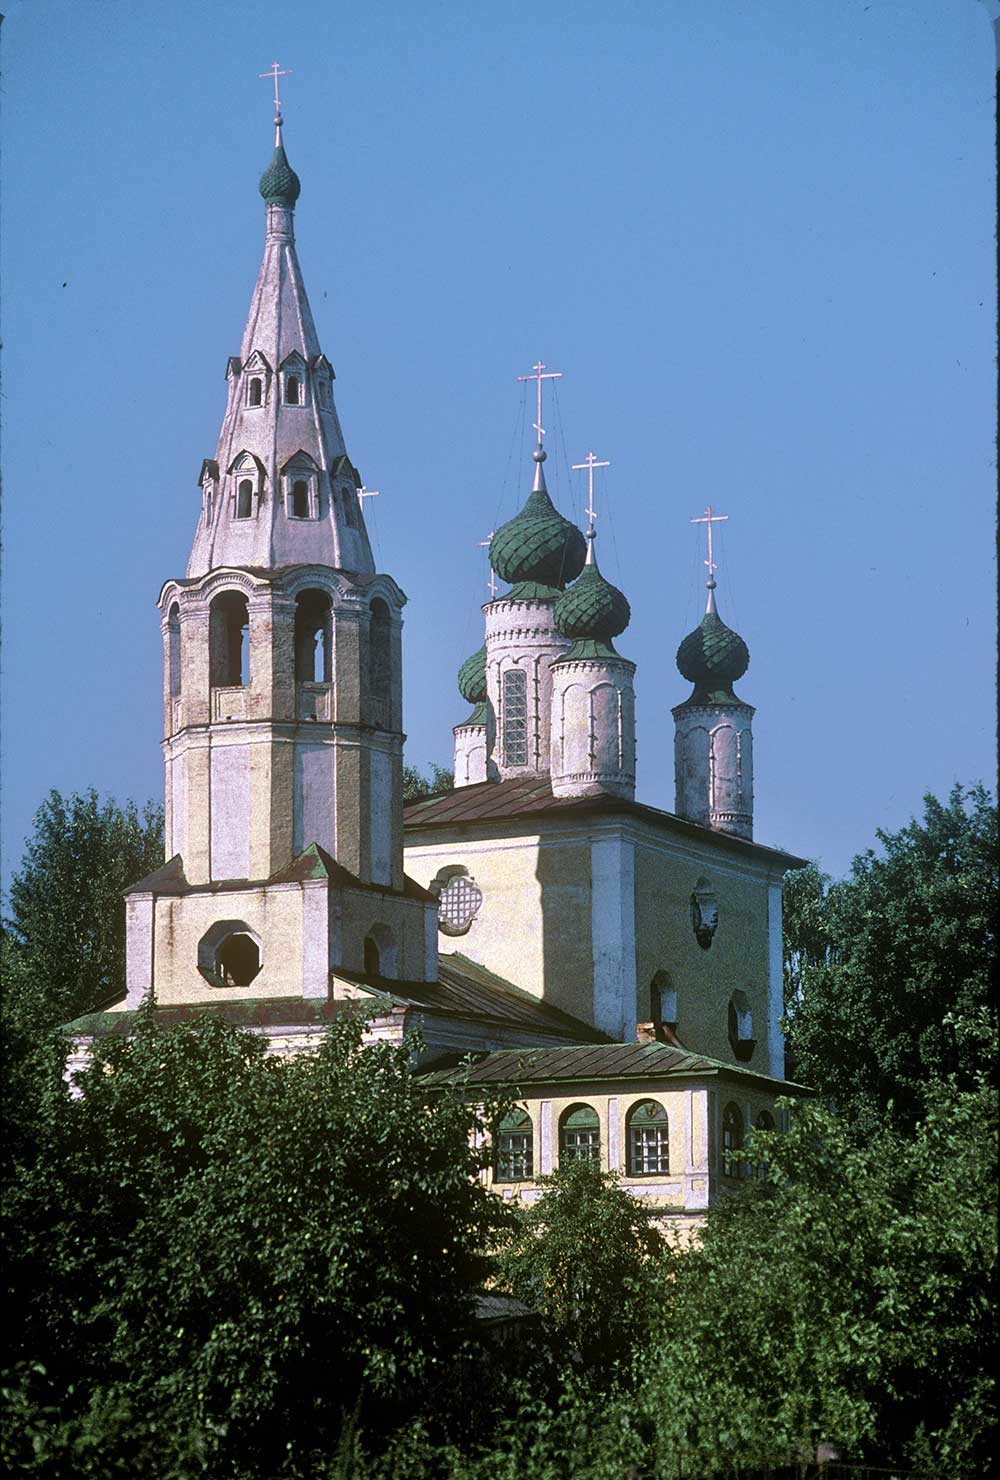 Bell tower & Church of Archangel Michael. Southwest view just upriver from Kazan Church. July 26, 1997.